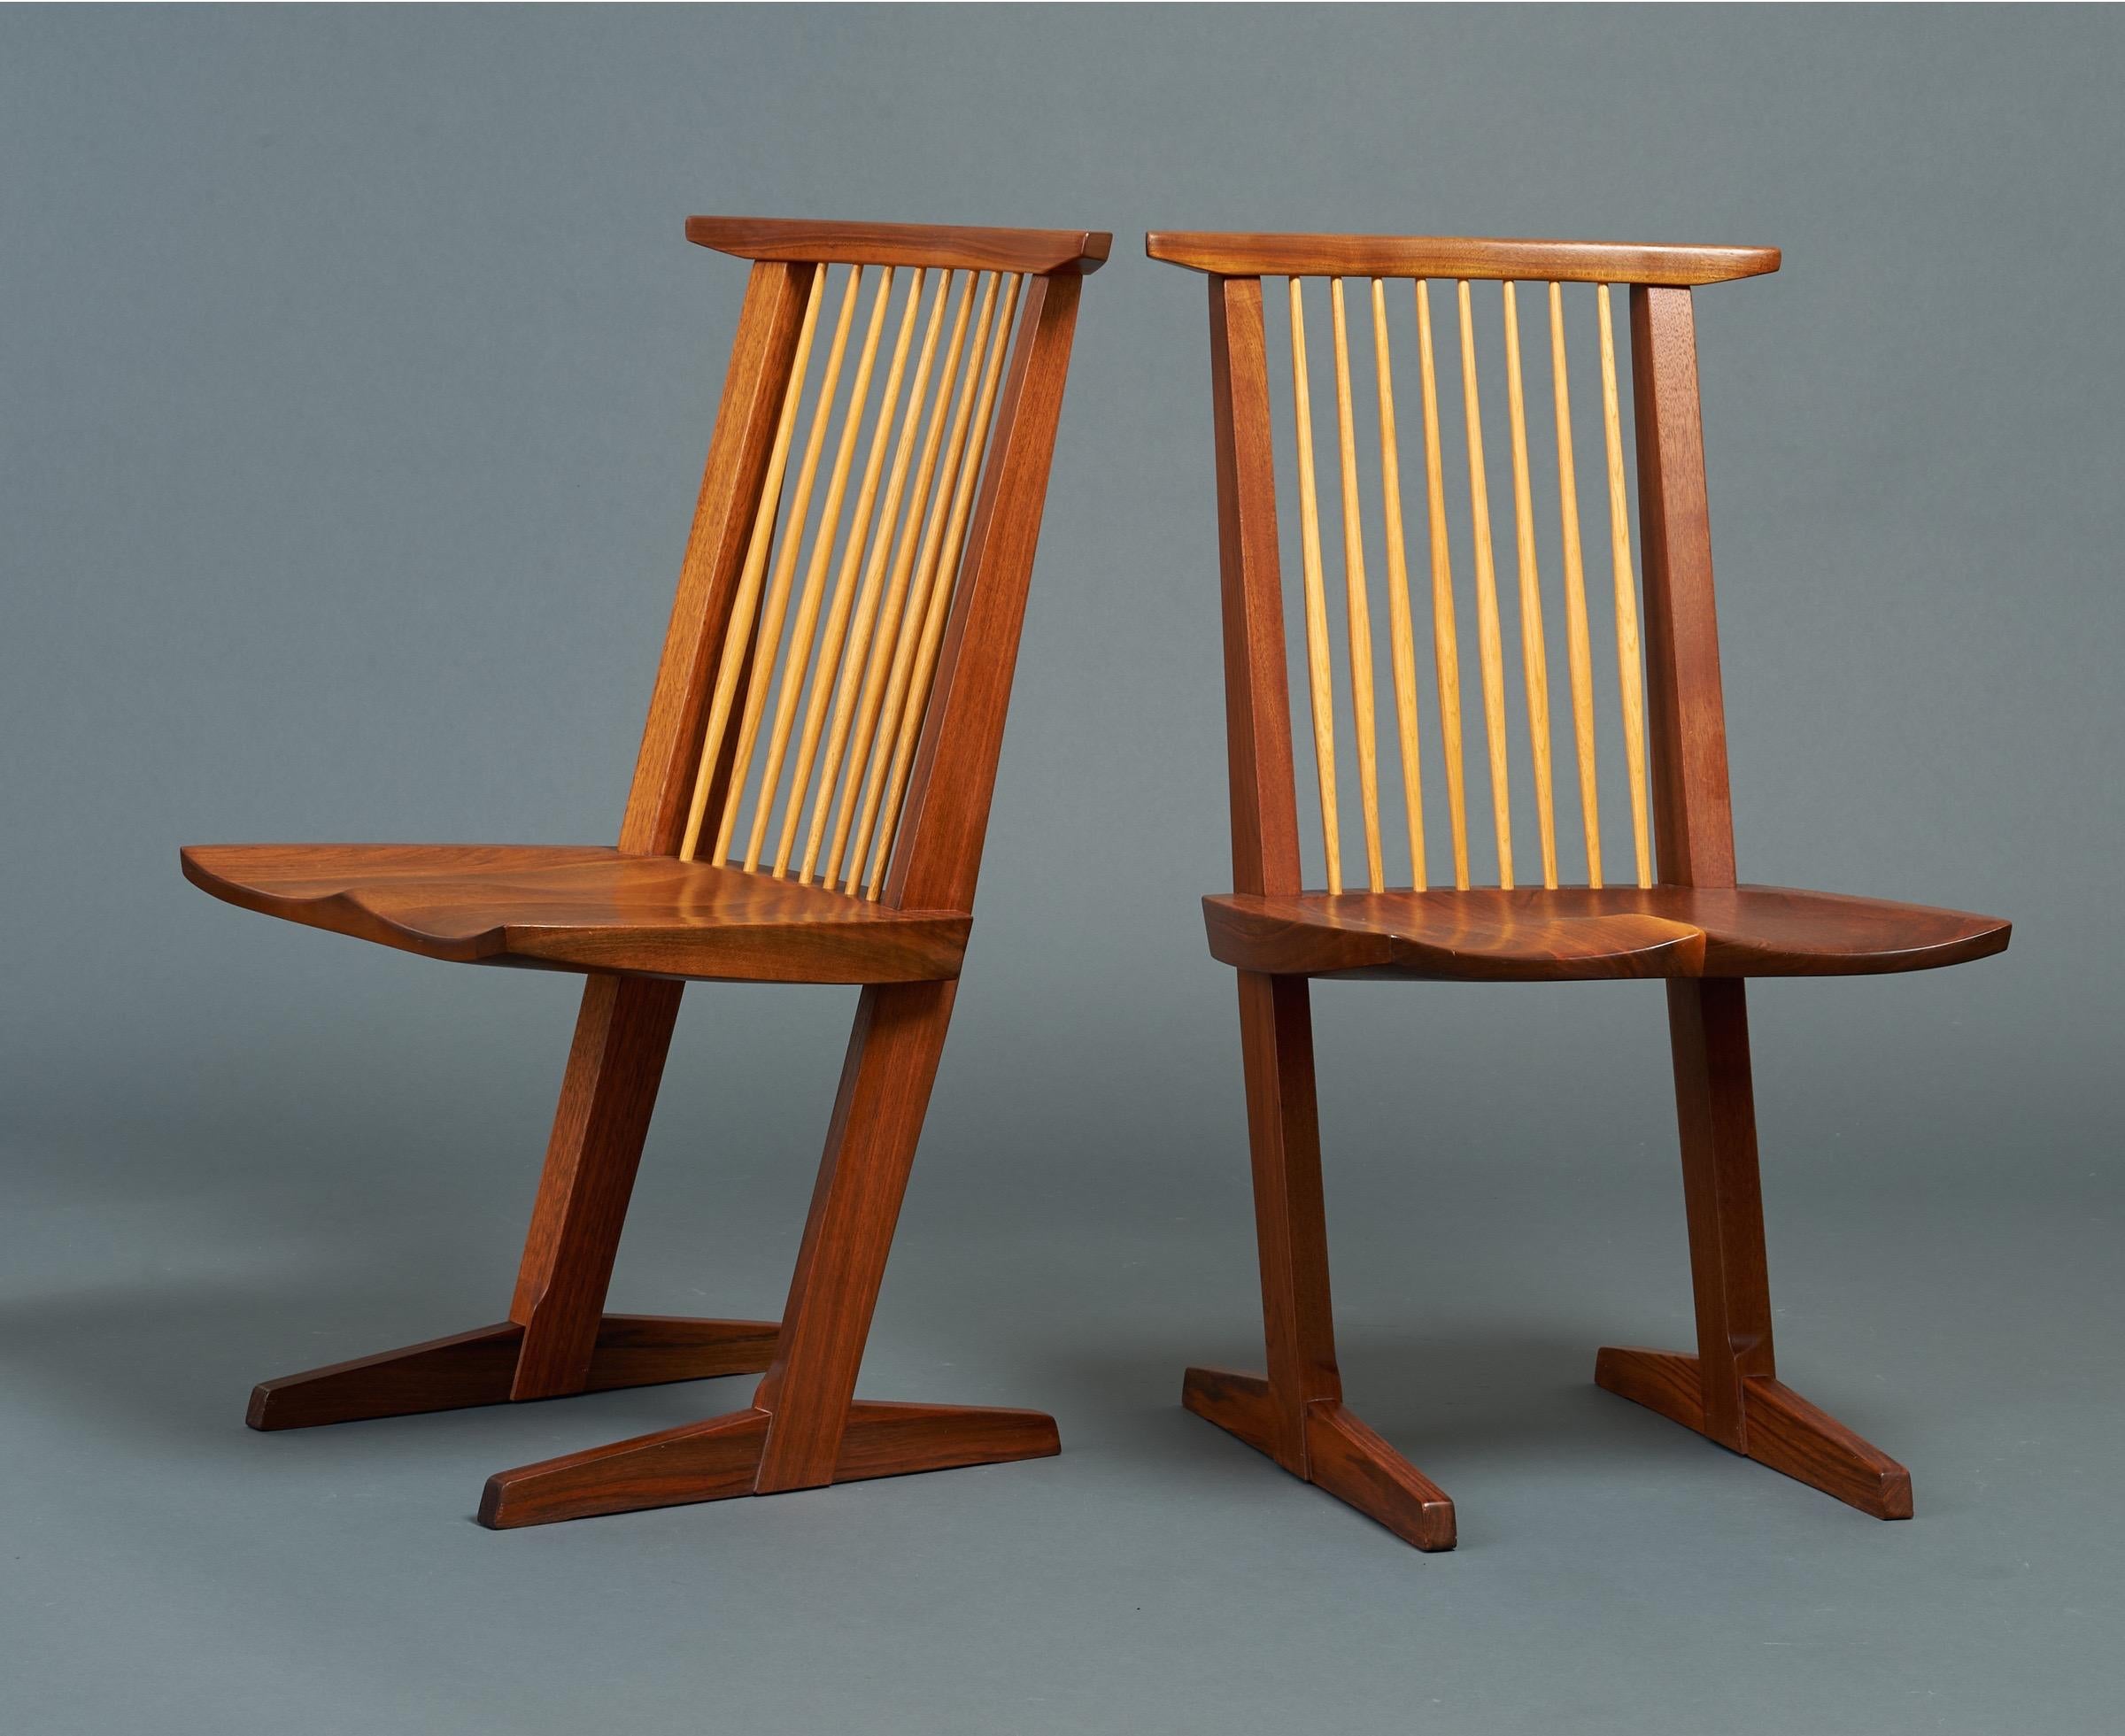 George Nakashima, Rare Sculptural Pair of Conoid Chairs in Walnut, Signed, 1989 In Good Condition For Sale In New York, NY